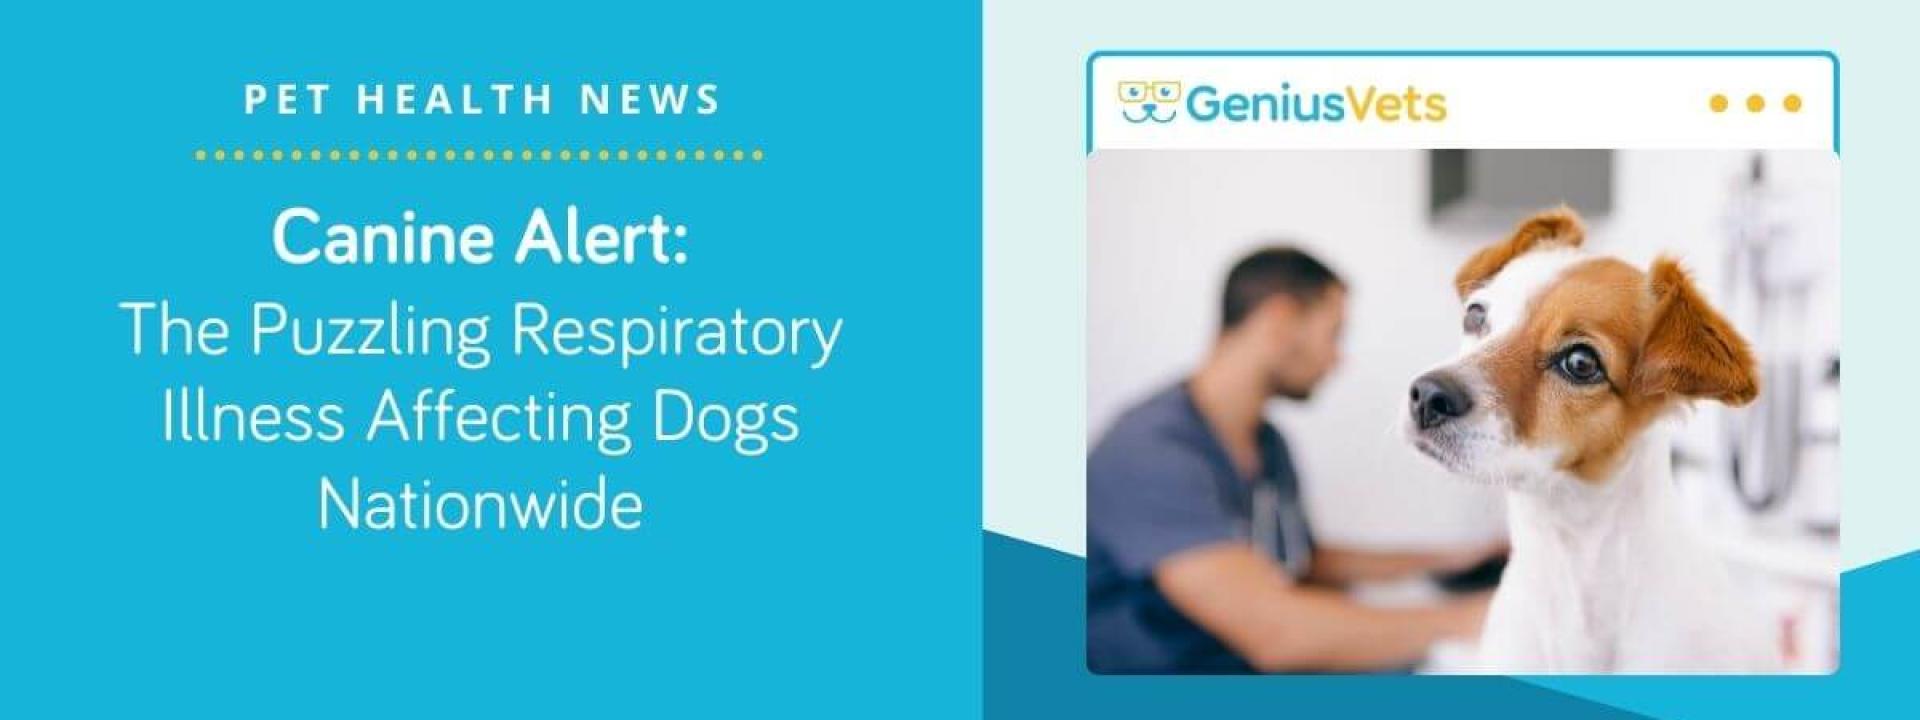 Canine Alert: The Puzzling Respiratory Illness Affecting Dogs Nationwide